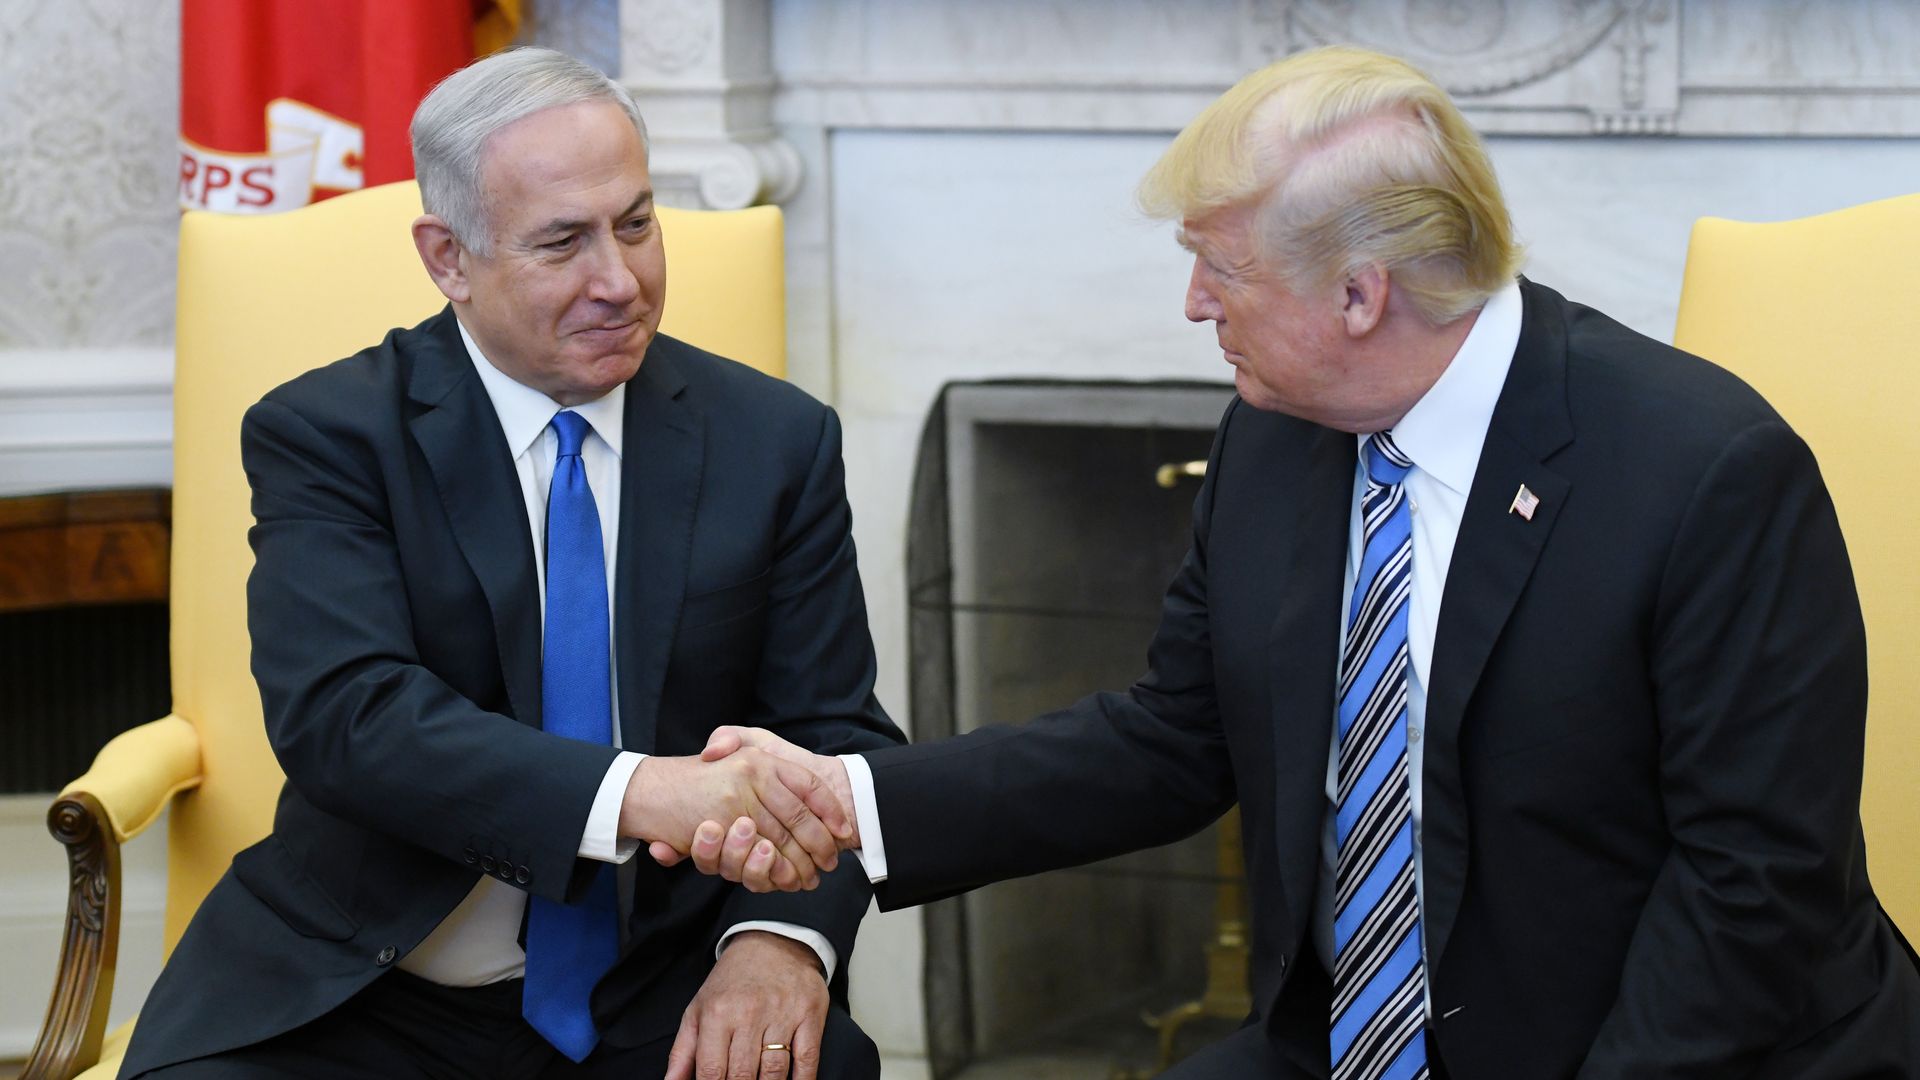 Trump and the Israeli prime minister shake hands in the Oval Office.